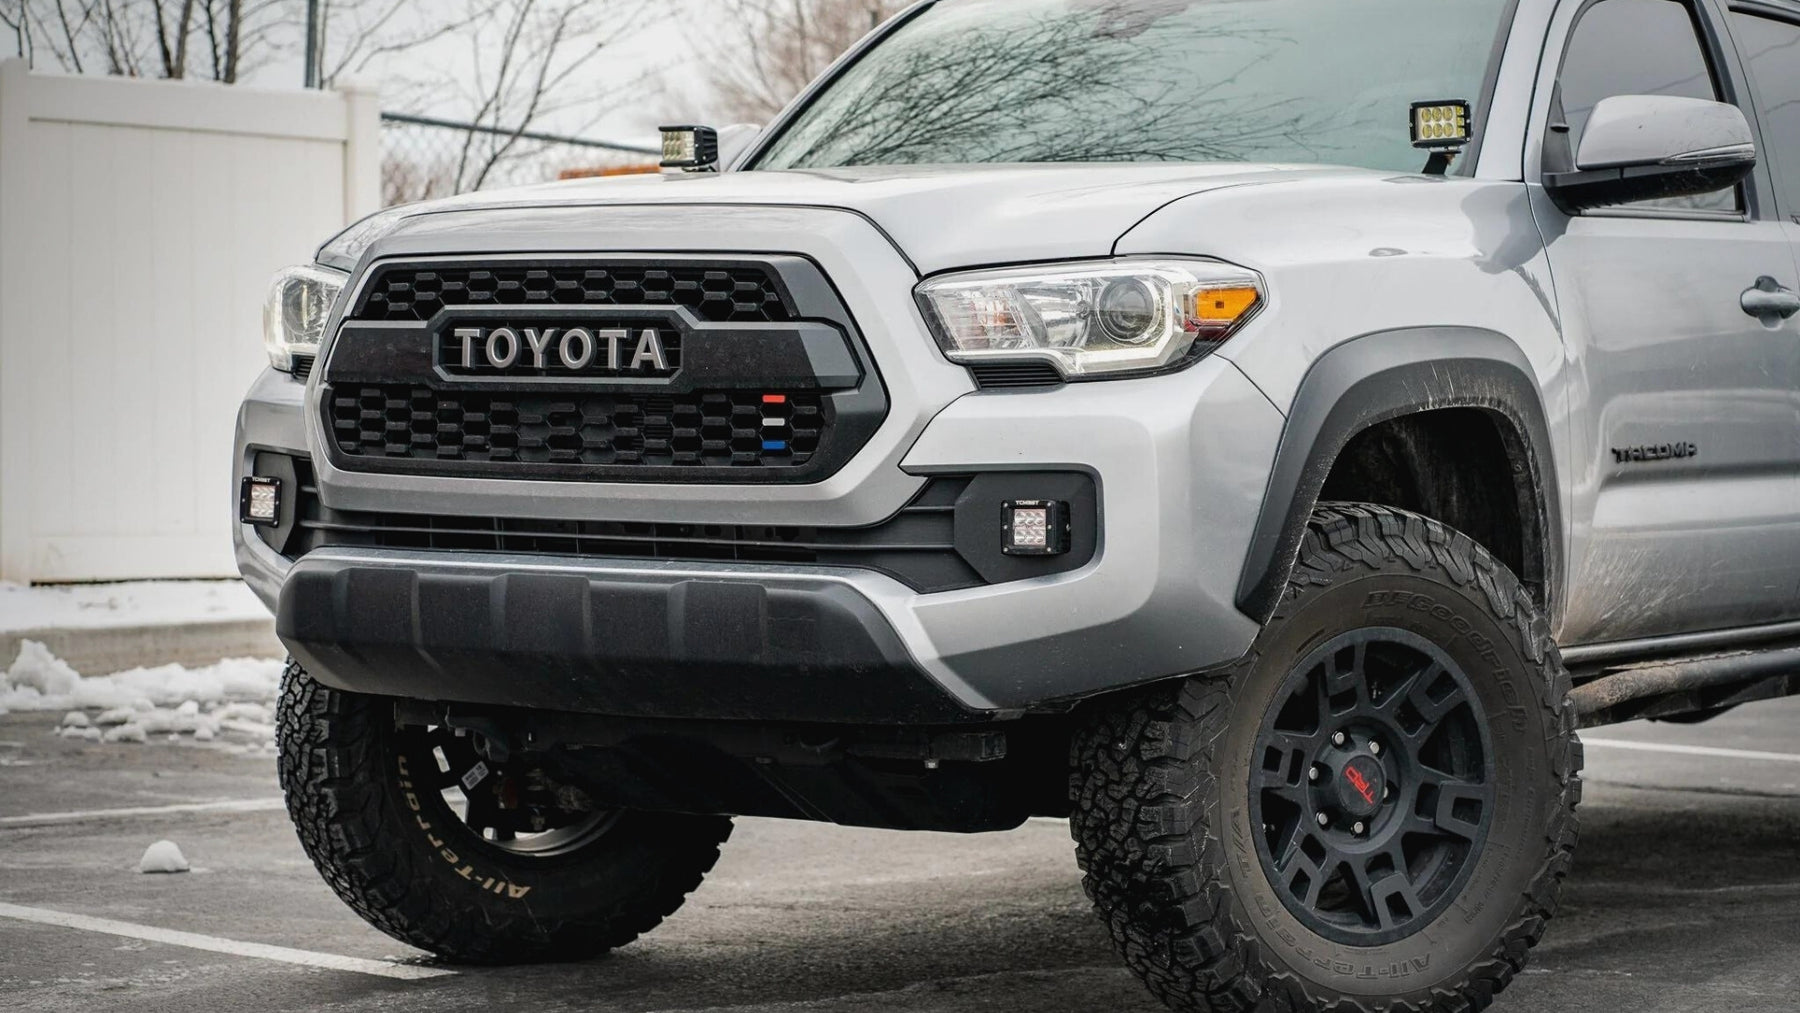 4 Reasons To Shop With Taco Vinyl For Your Toyota Accessories